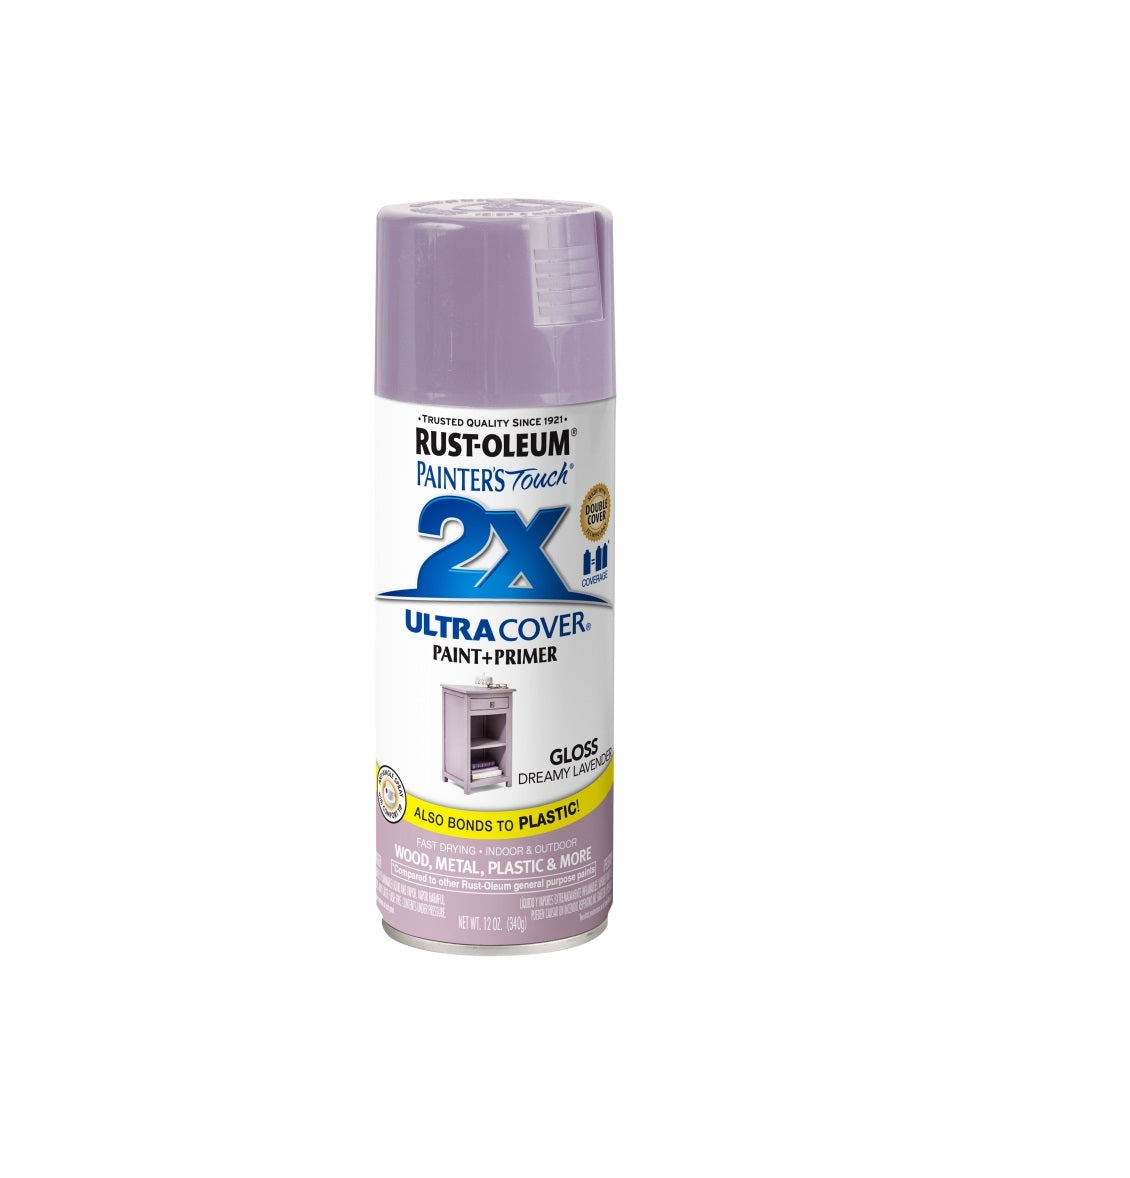 Rust-Oleum 366991 Painter's Touch 2X Ultra Cover Spray Paint, Gloss Dreamy Lavender, 12 Oz